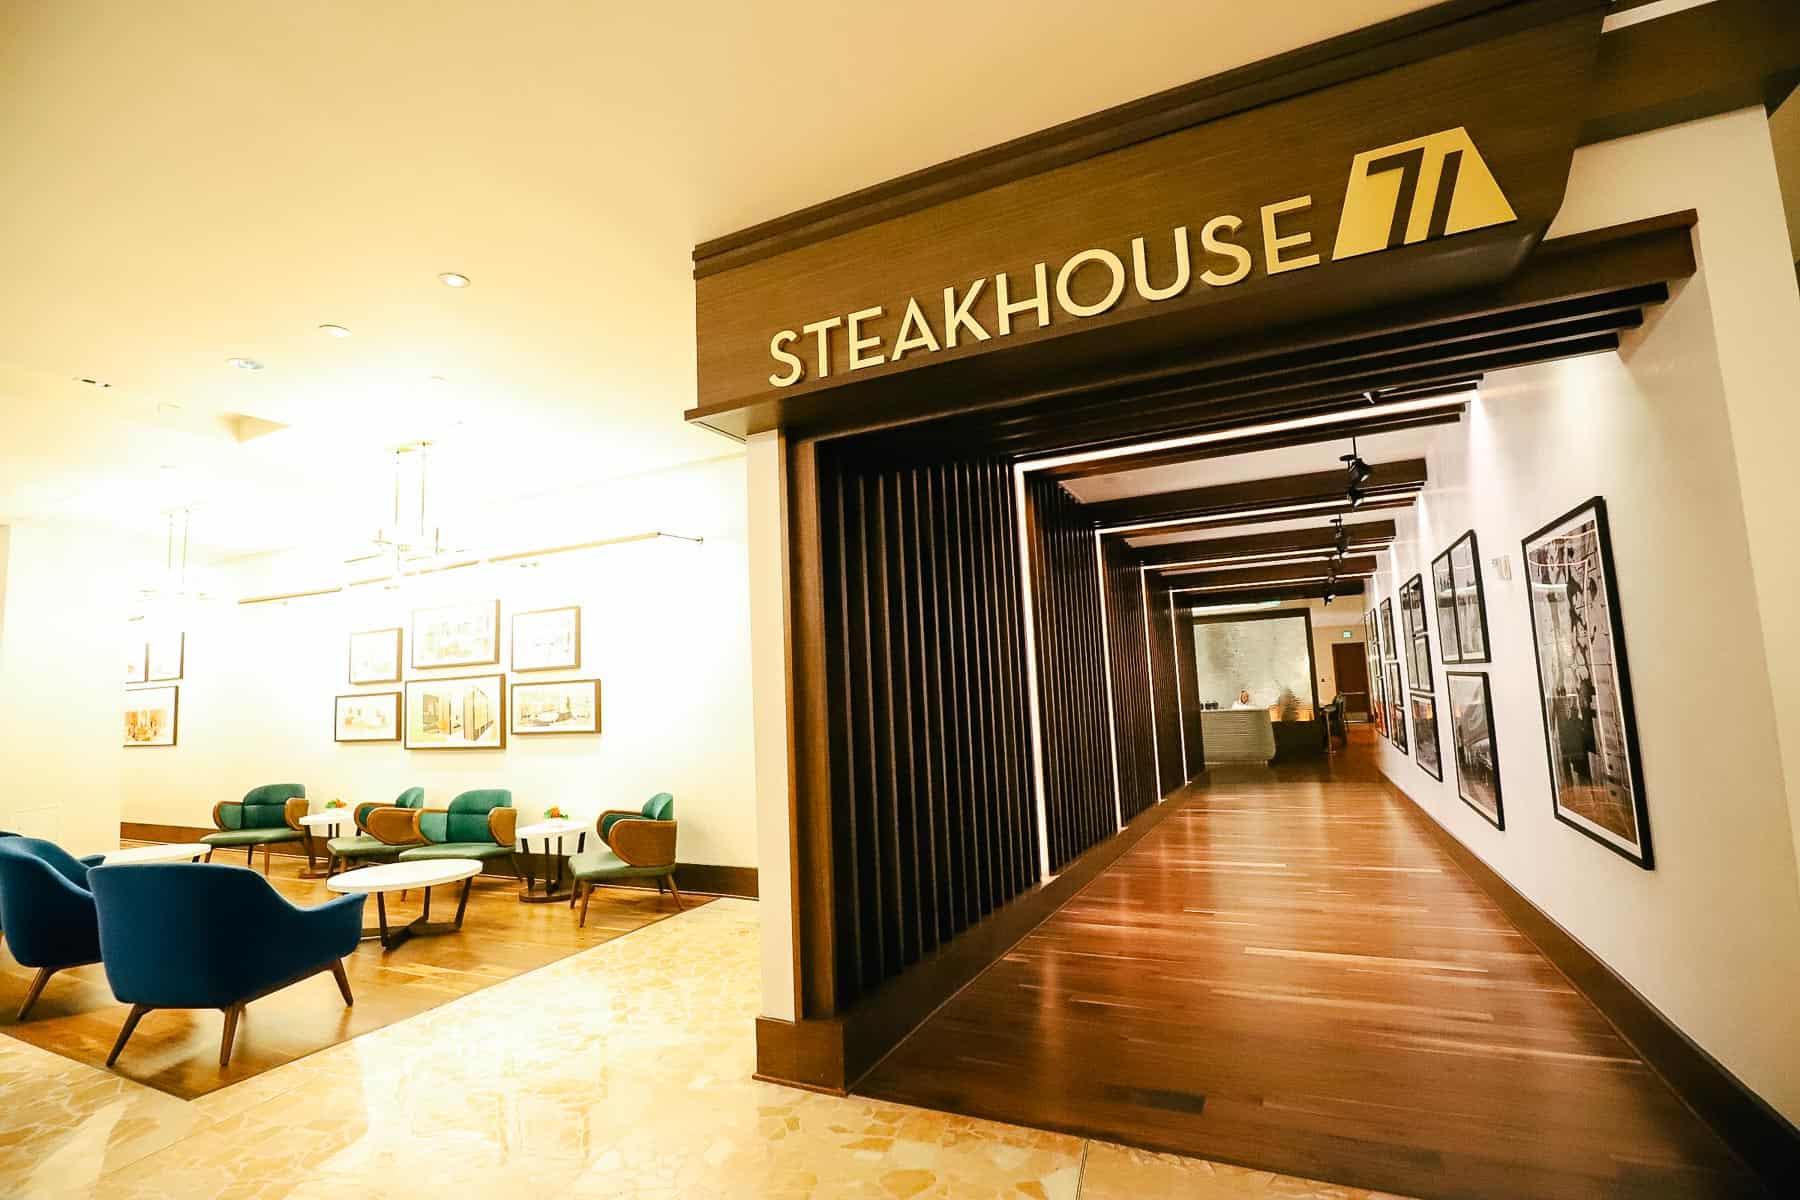 Steakhouse 71 Breakfast Review (Start Your Day with a Meal at Disney’s Contemporary)